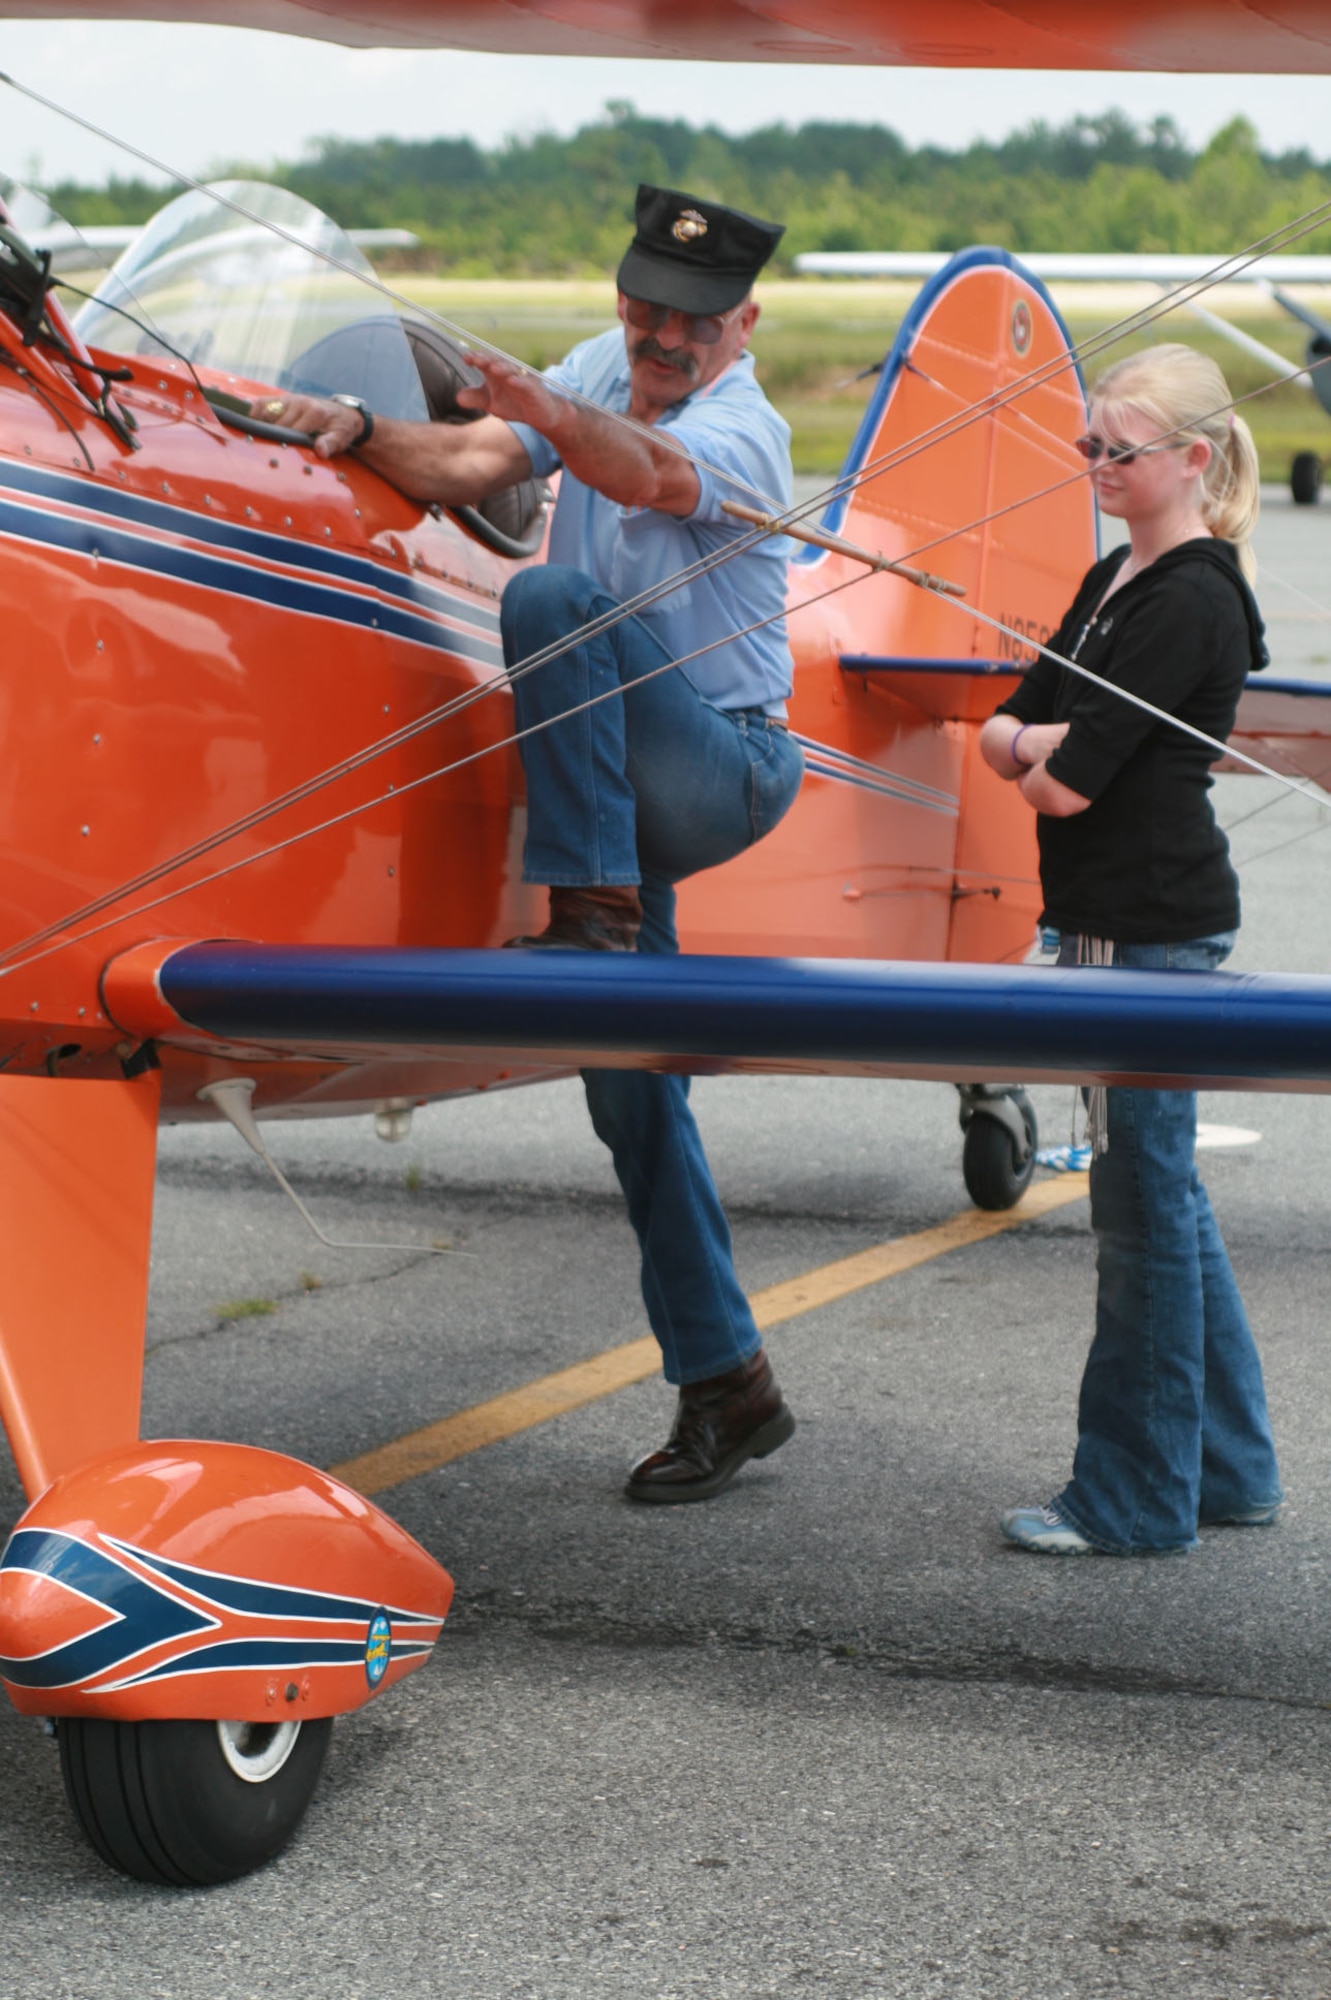 SEYMOUR JOHNSON AIR FORCE BASE, N.C. - Stephen Torrent, pilot, shows 12-year-old Nixon Waters how to climb into his Steen Skybolt during the Experimental Aircraft Association Young Eagles Day at the Goldsboro/Wayne County Municipal Airport May 24.  More than 80 base youth participated in the day's activity.  The EAA Young Eagles program was launched in 1992 to give interested young people an opportunity to go flying in a general aviation airplane. These flights are offered free of charge and are made possible through the EAA member volunteers. (U.S. Air Force photo by Staff Sgt. Les Waters)